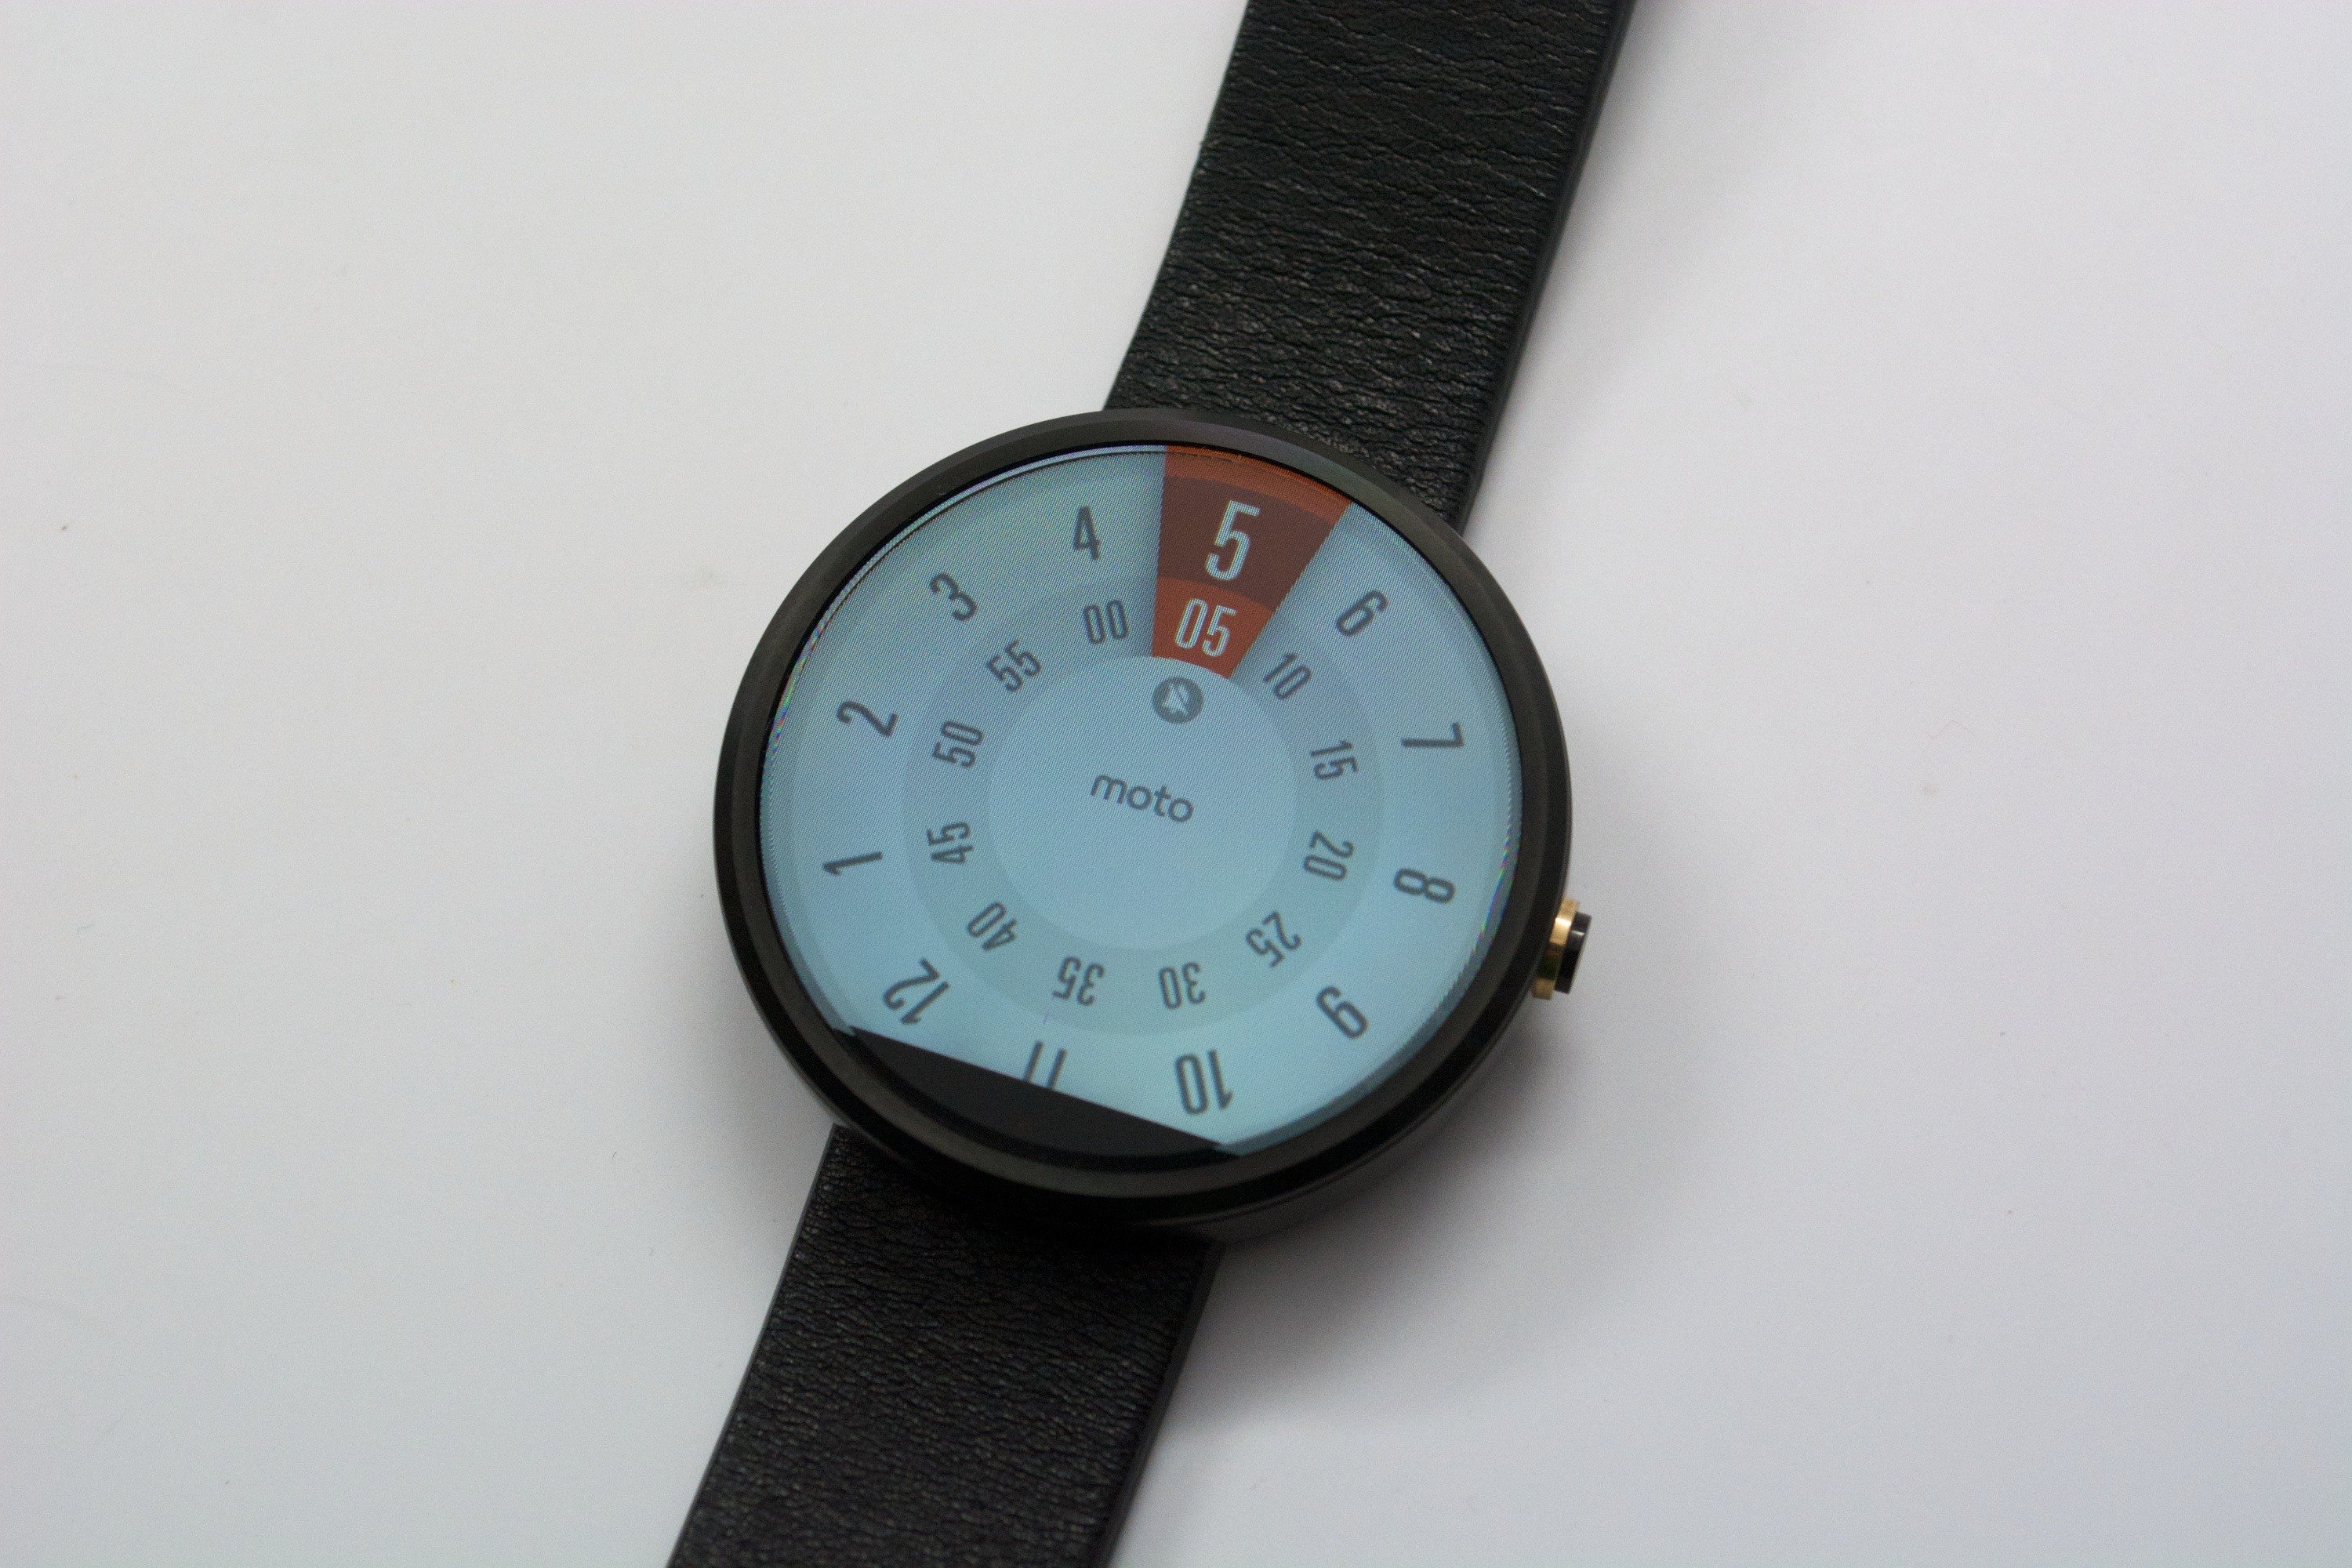 Here's why the Moto 360 is worth buying.